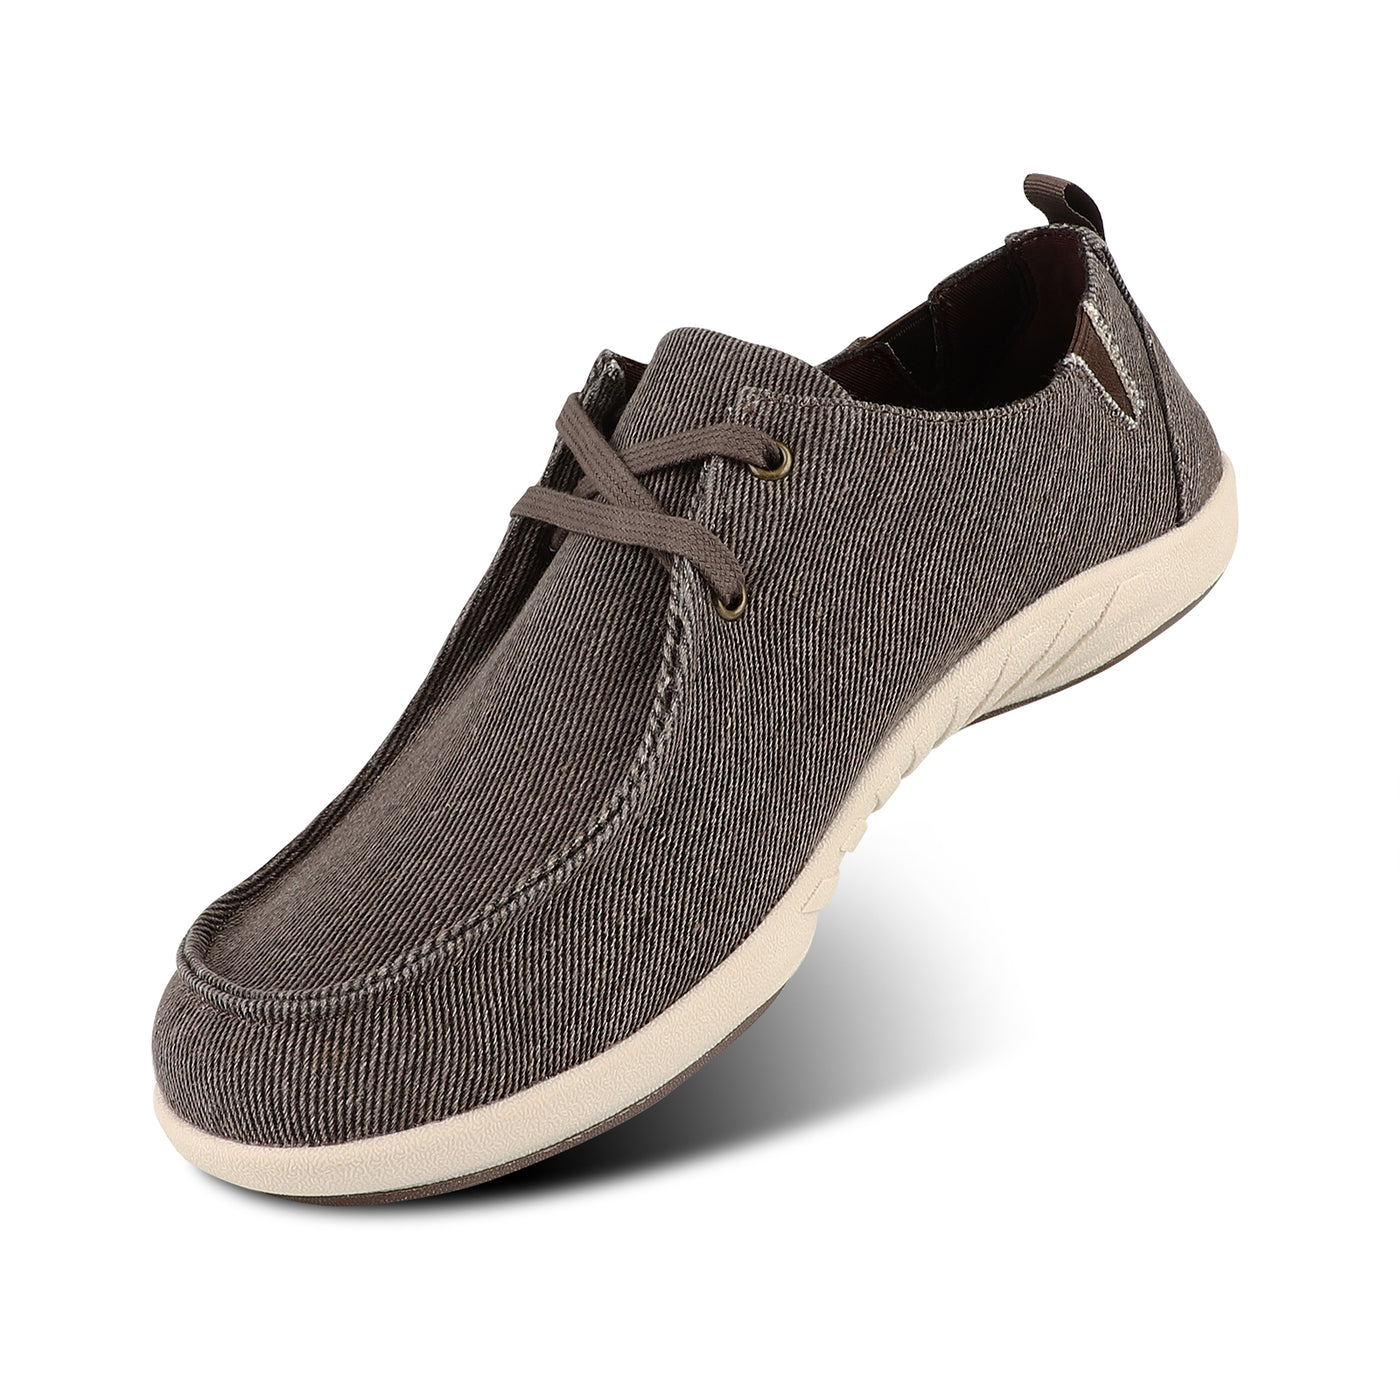 Men's Twill Casual Shoes